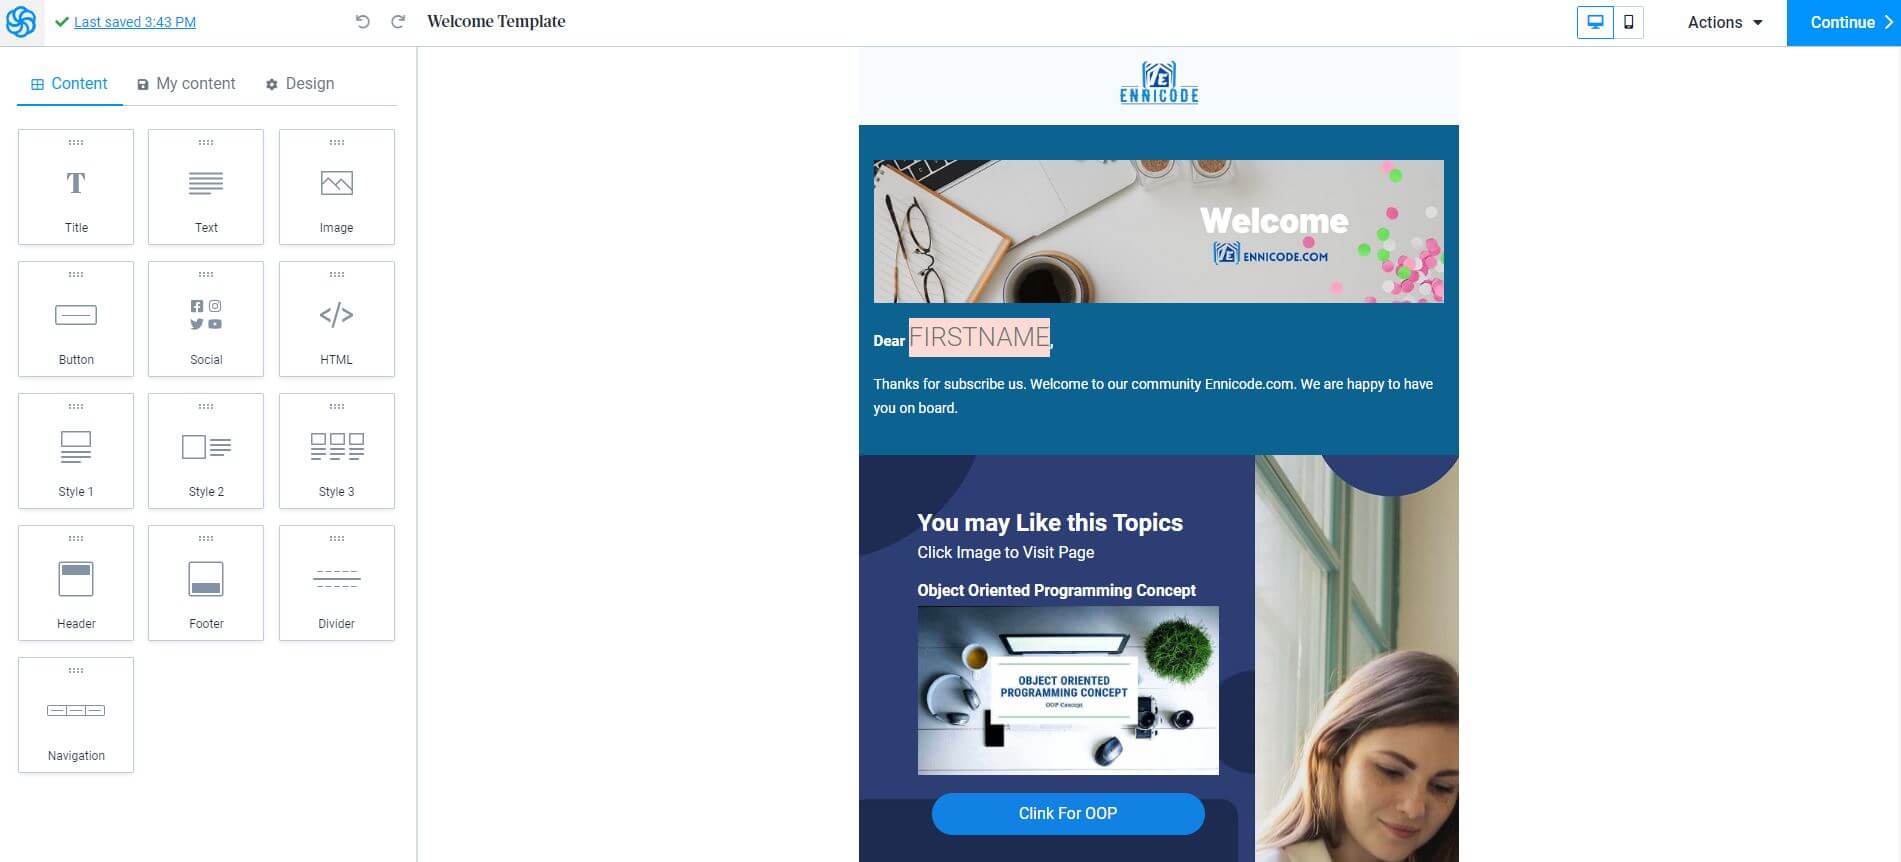 Email Design and Personalization in Sendinblue